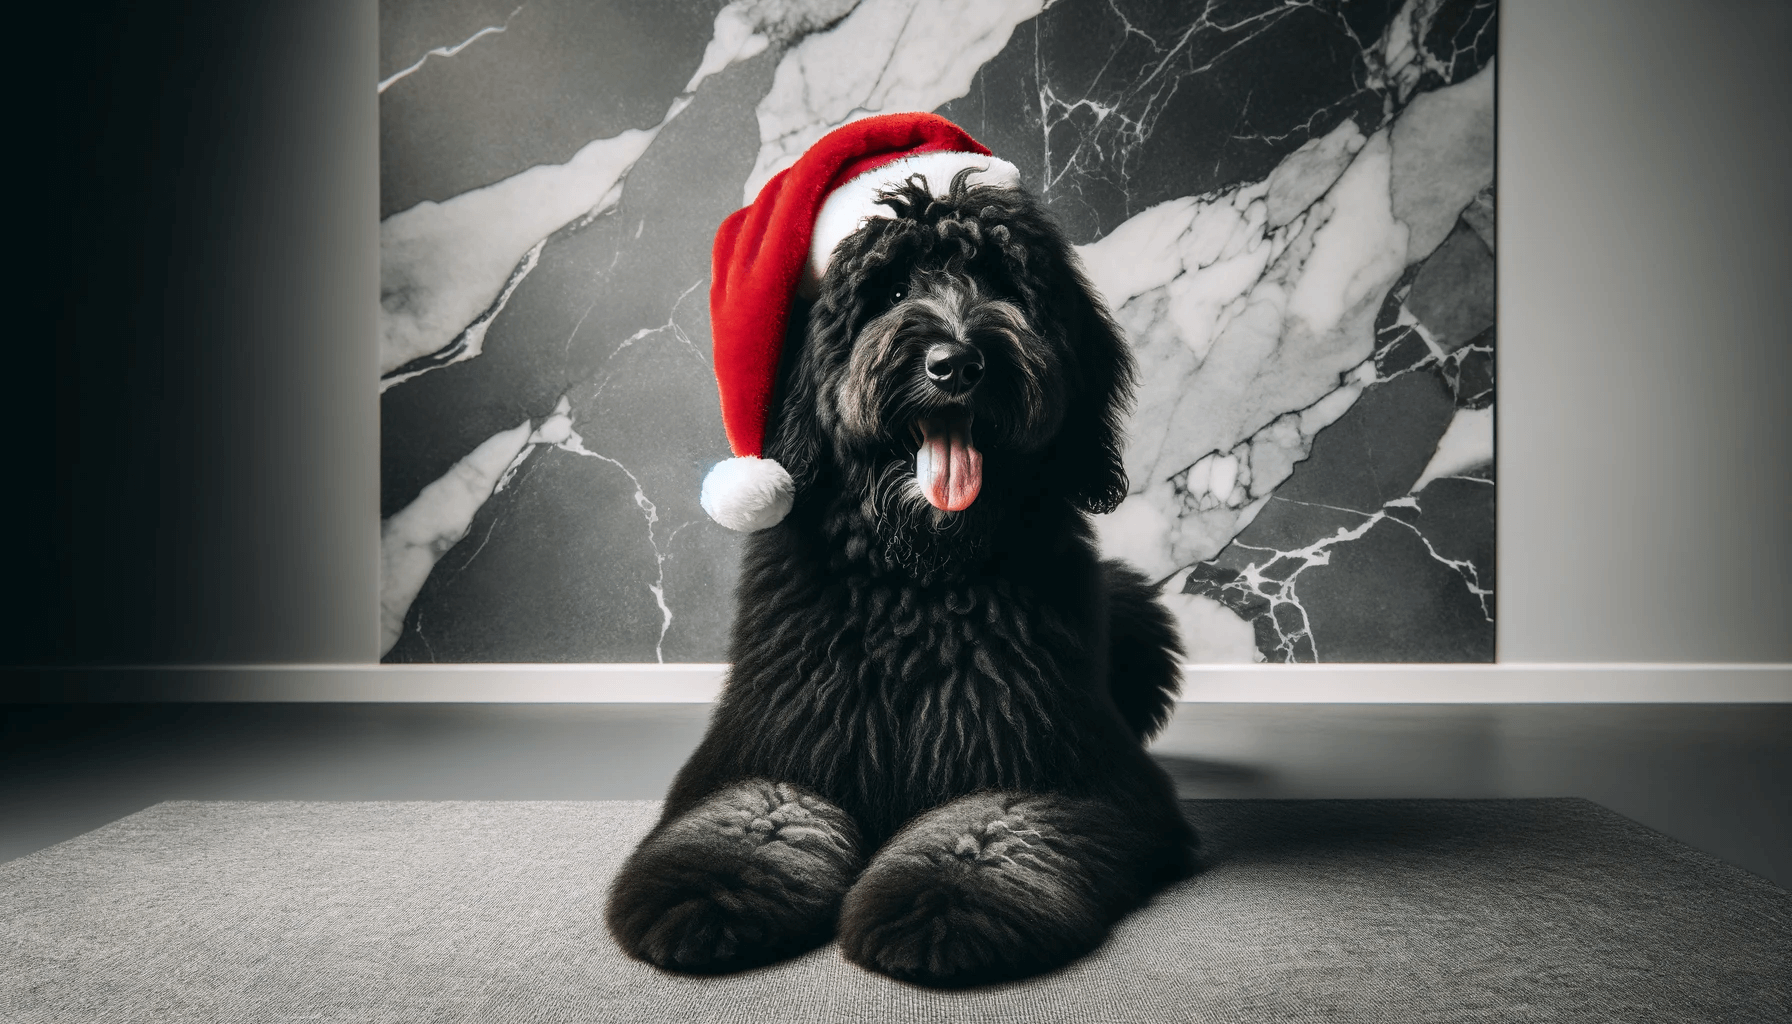 Black Aussiedoodle wearing a Santa hat sitting on a grey carpet against a marble-like wall depicting a festive scene